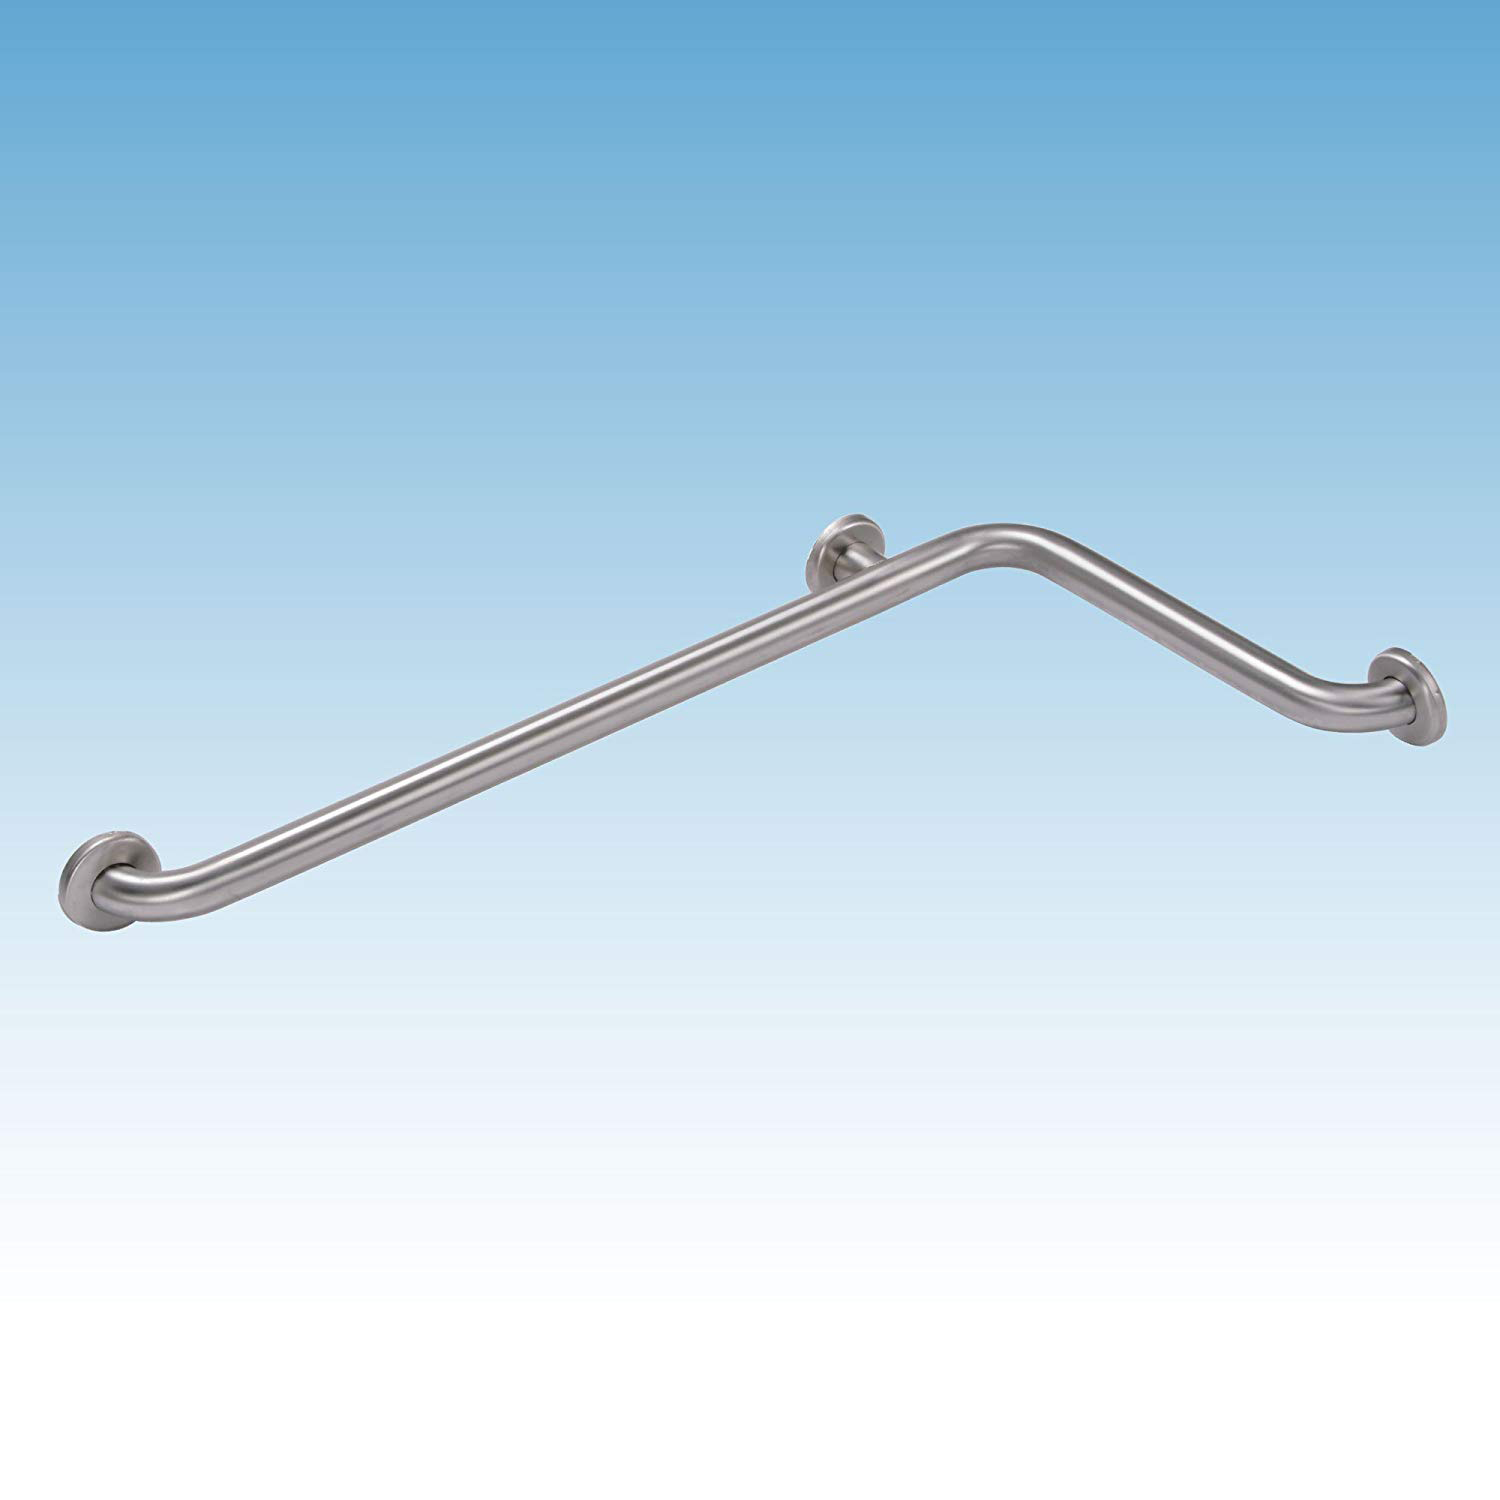 CareGiver 34x18" L-Shaped Grab Bar in Stainless Steel